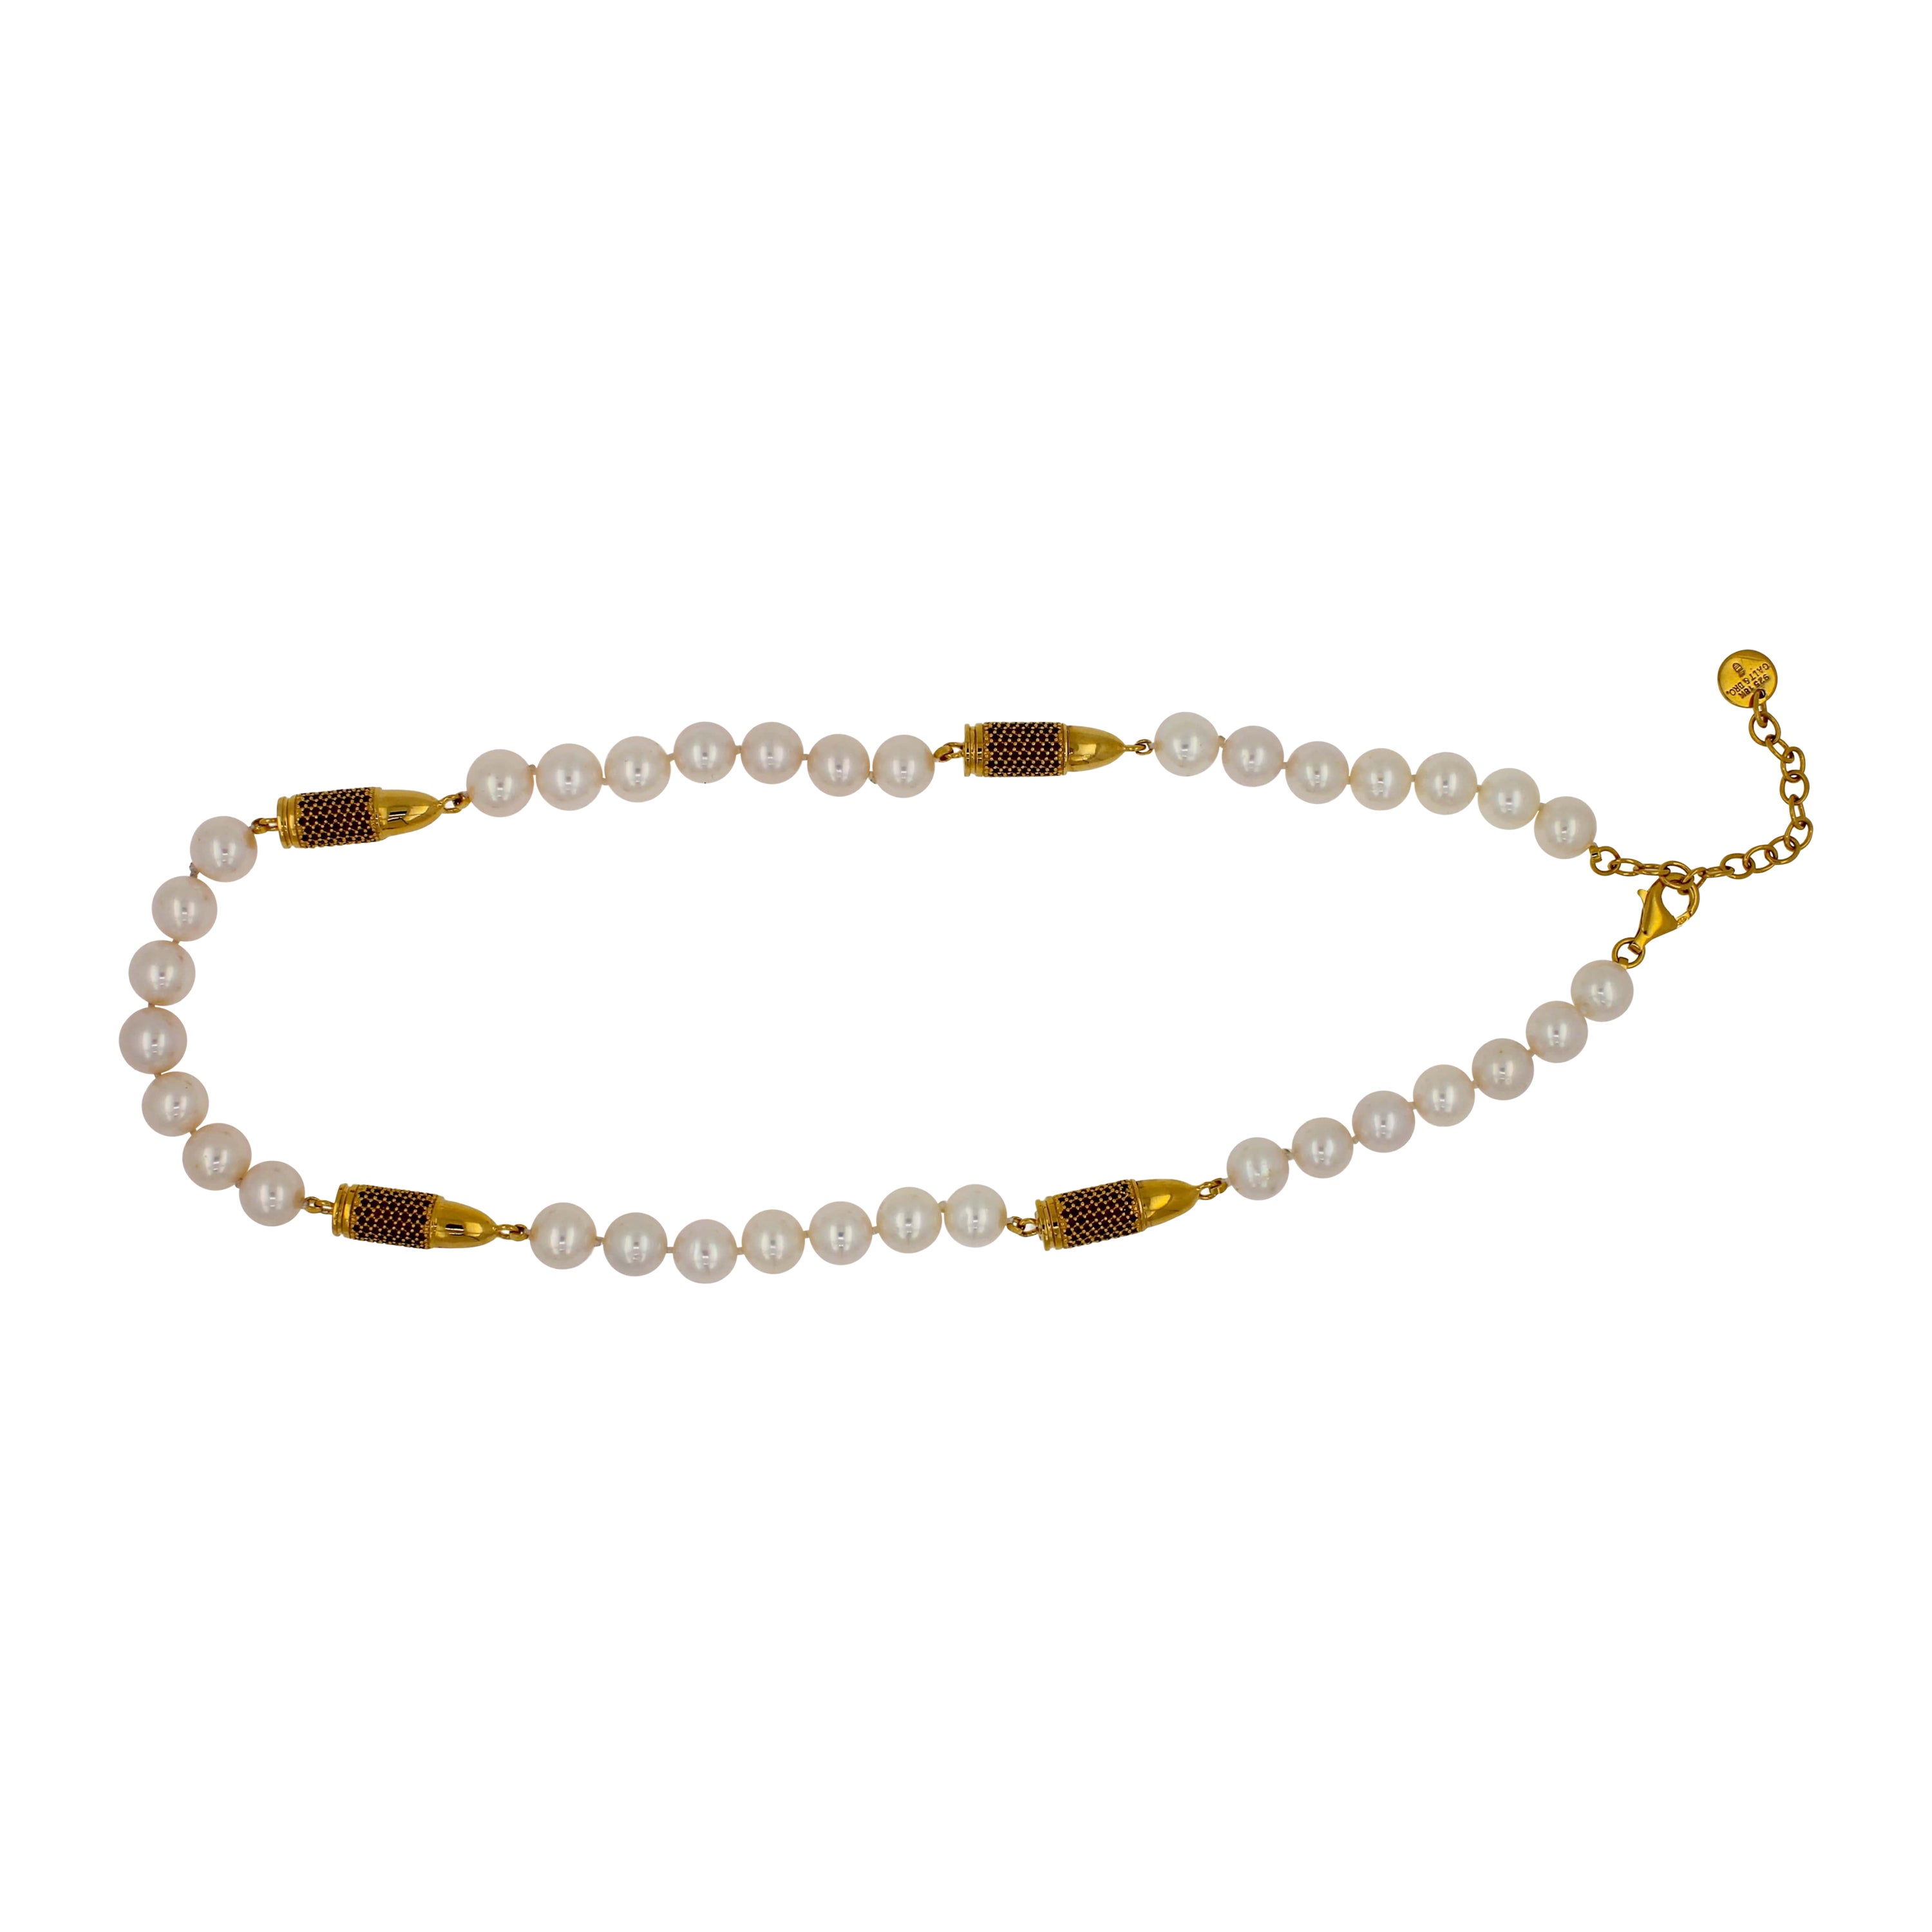 Red Garnet Pave Set Gold Bullet Rocket White Pearl Silver 18K Vermeil Necklace
*Genuine Red Garnet Gemstones 5.00 CTW
* Natural White Pearls
* 18K Yellow Gold Vermeil
* 18 to 20 Inches Adjustable Clasp